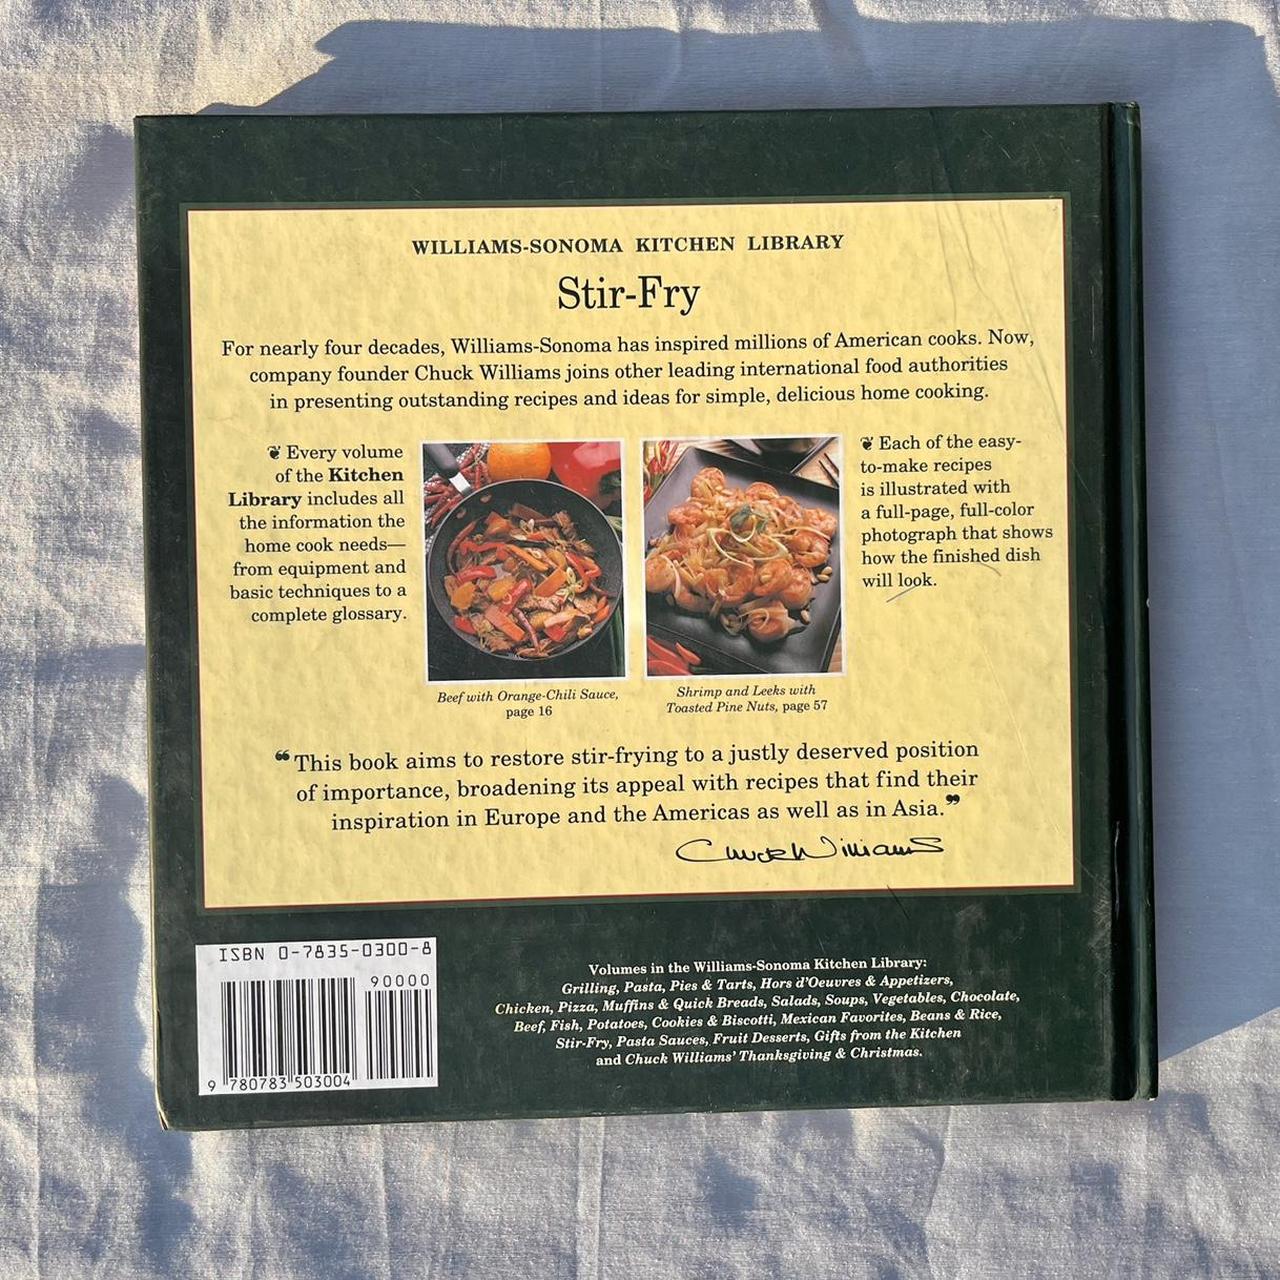 Product Image 2 - Williams-Sonoma Kitchen Library: Stir-Fry book.